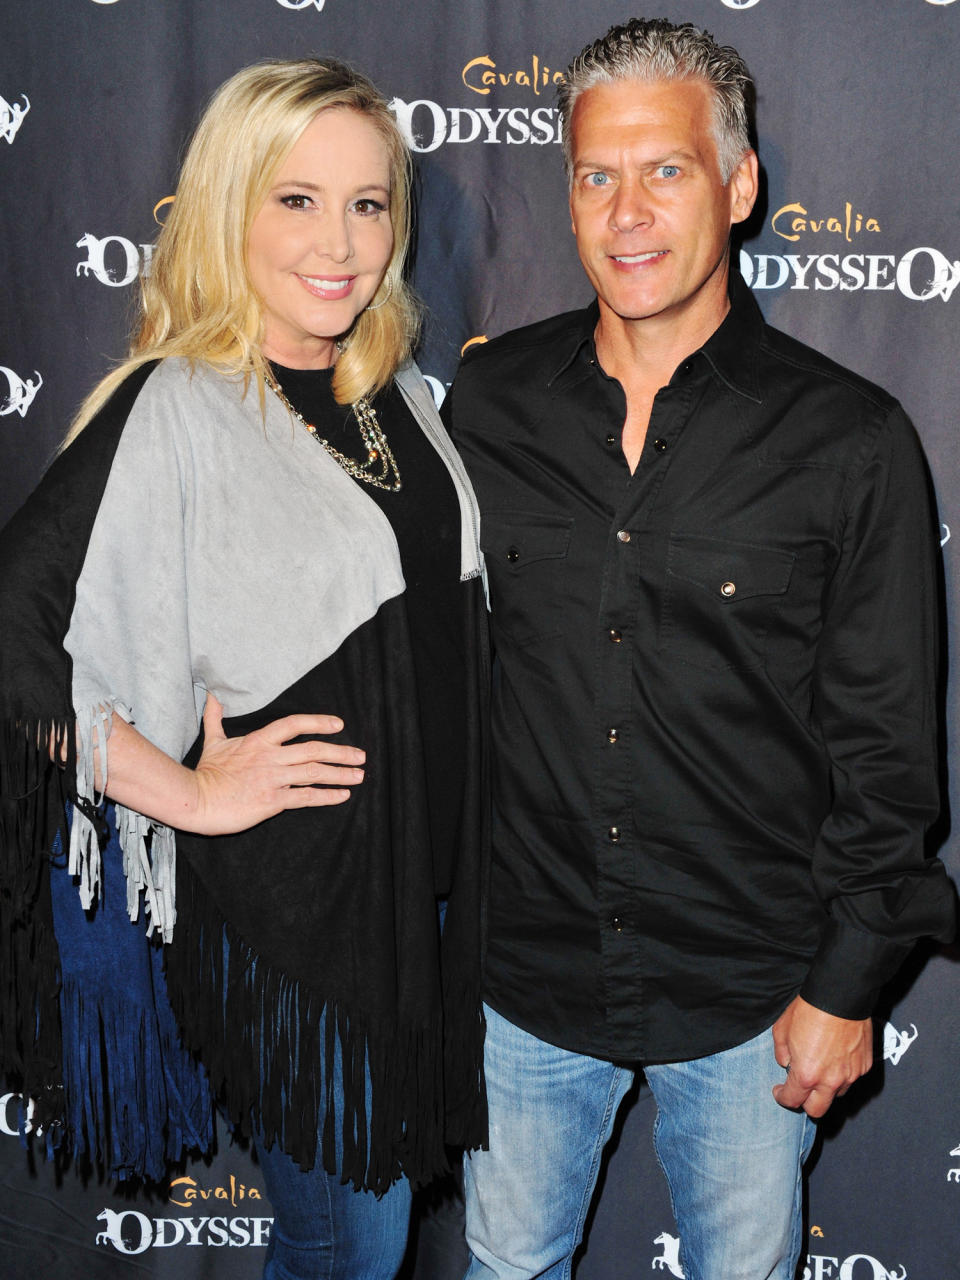 Will Shannon Beador Change Her Last Name After Divorce?